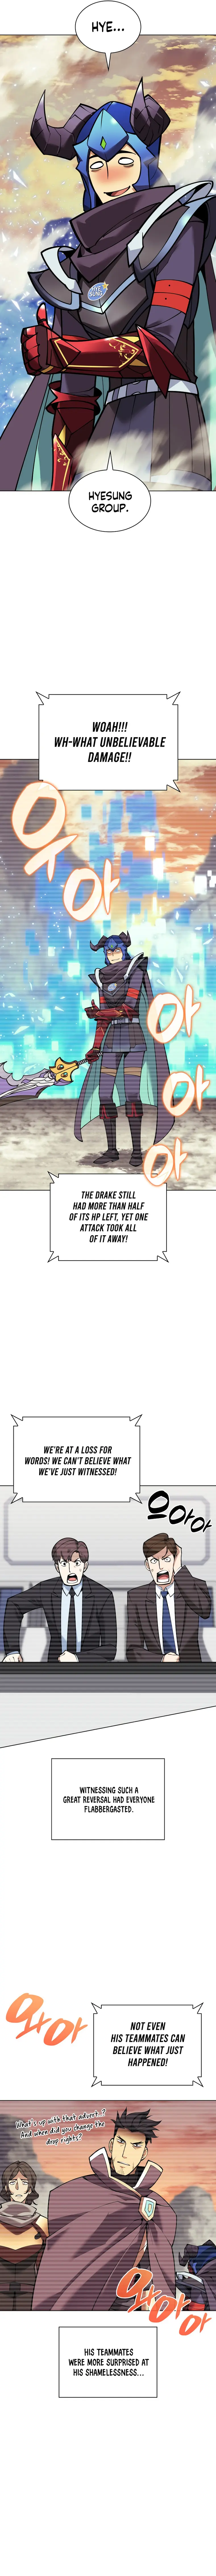 Let's Read Overgeared - Chapter 220 Manga Manhwa Comic toon Online Everyday English Translation on Reaper Scan